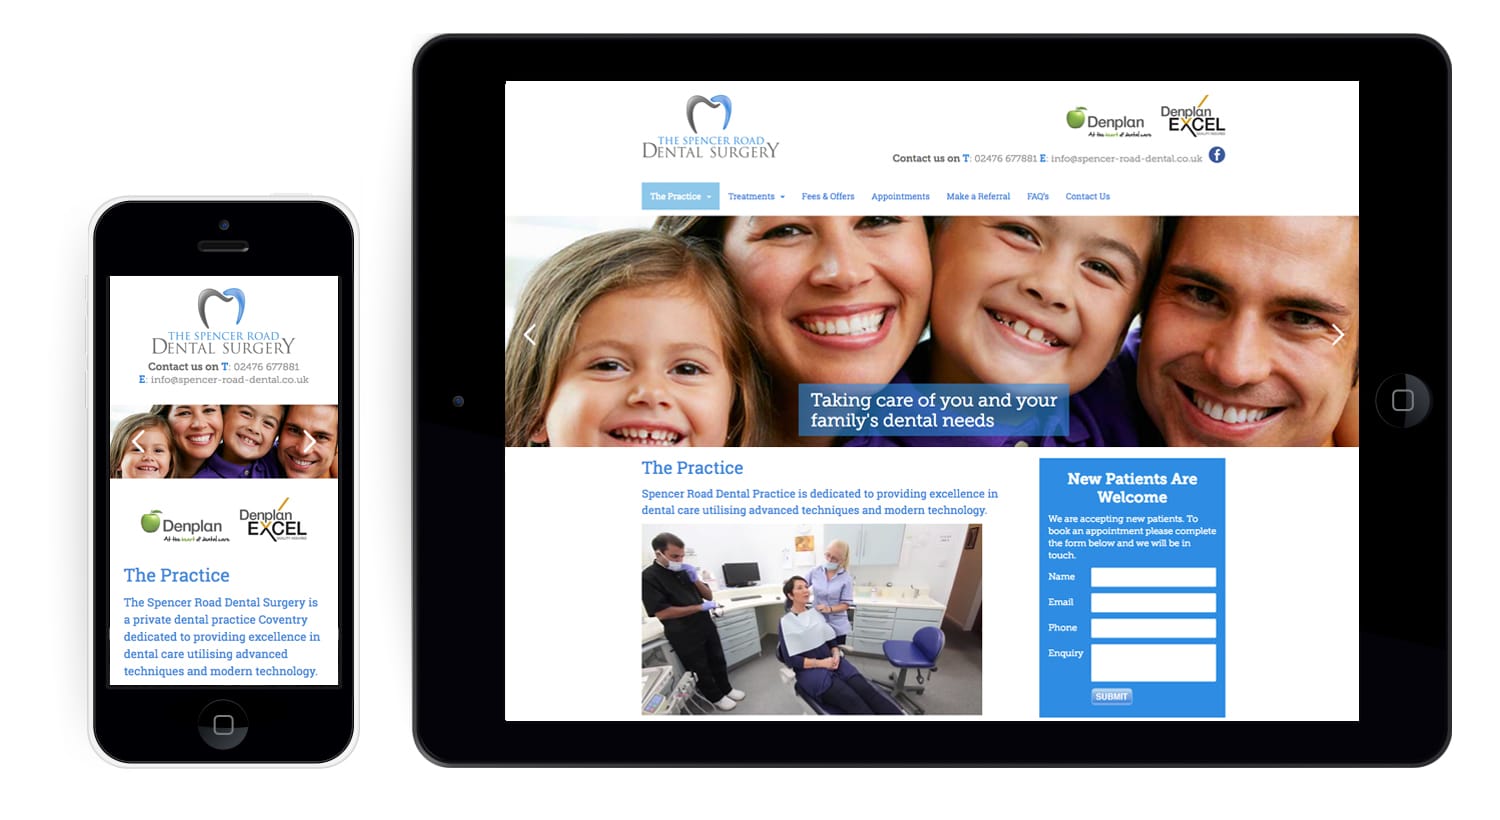 Spencer Road Dental Surgery Website tablet and phone layout